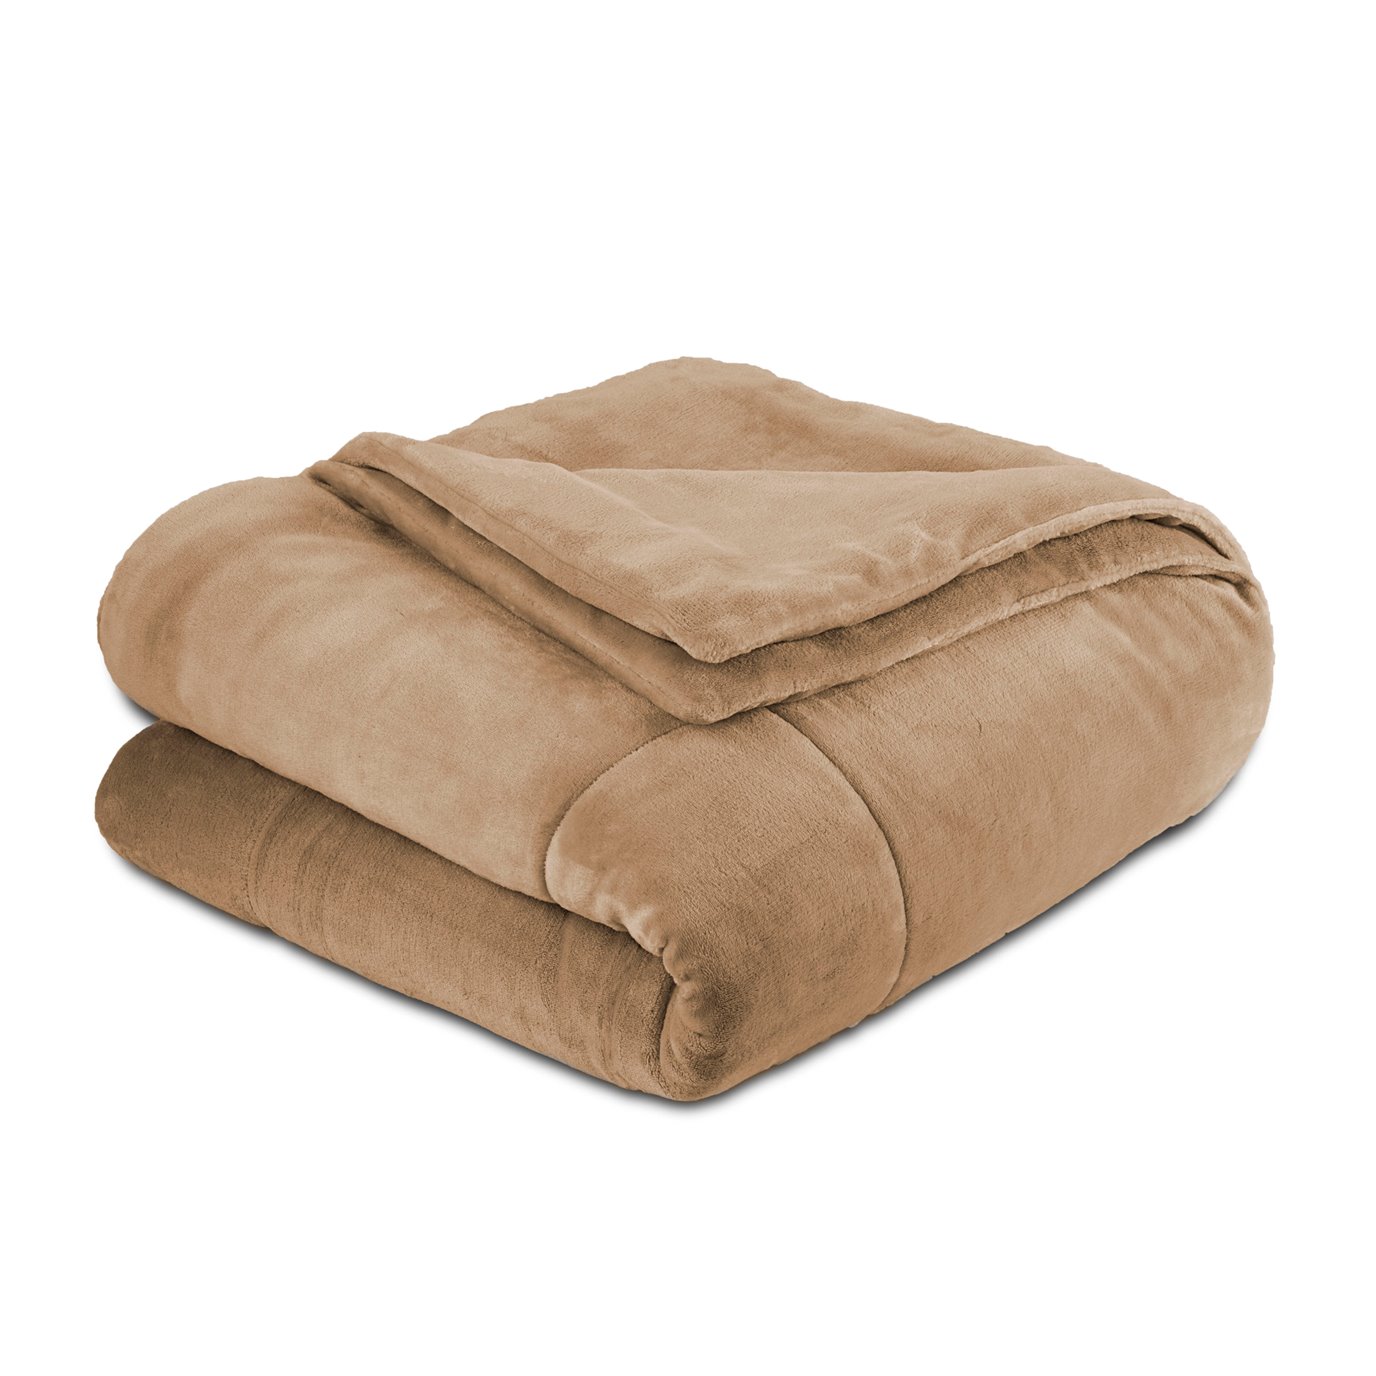 Vellux PlushLux Filled Twin Sand Blanket